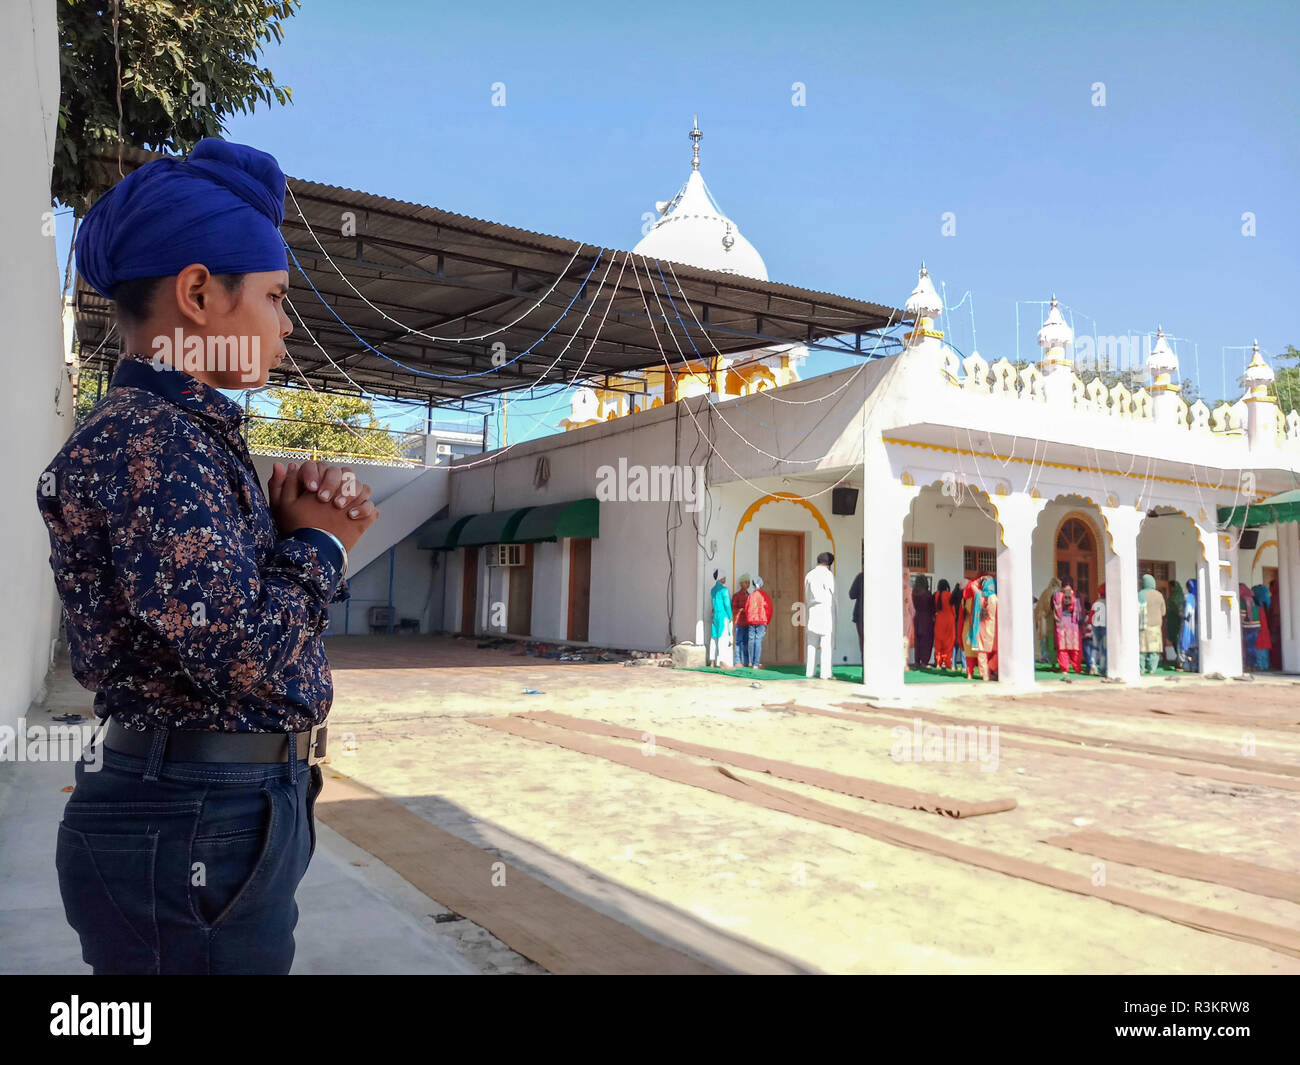 Mohali, Punjab, India. 23rd Nov, 2018. A Sikh devotee seen praying outside Gurdwara or a Sikh temple during the occasion of the 550th birth anniversary of Guru Nanak Dev, in Mohali.Sikhism was founded in the 15th century by Guru Nanak, who broke away from Hinduism, India's dominant religion, He preached the equality of races and genders and the rejection of image-worship and the caste system. Credit: Saqib Majeed/SOPA Images/ZUMA Wire/Alamy Live News Stock Photo